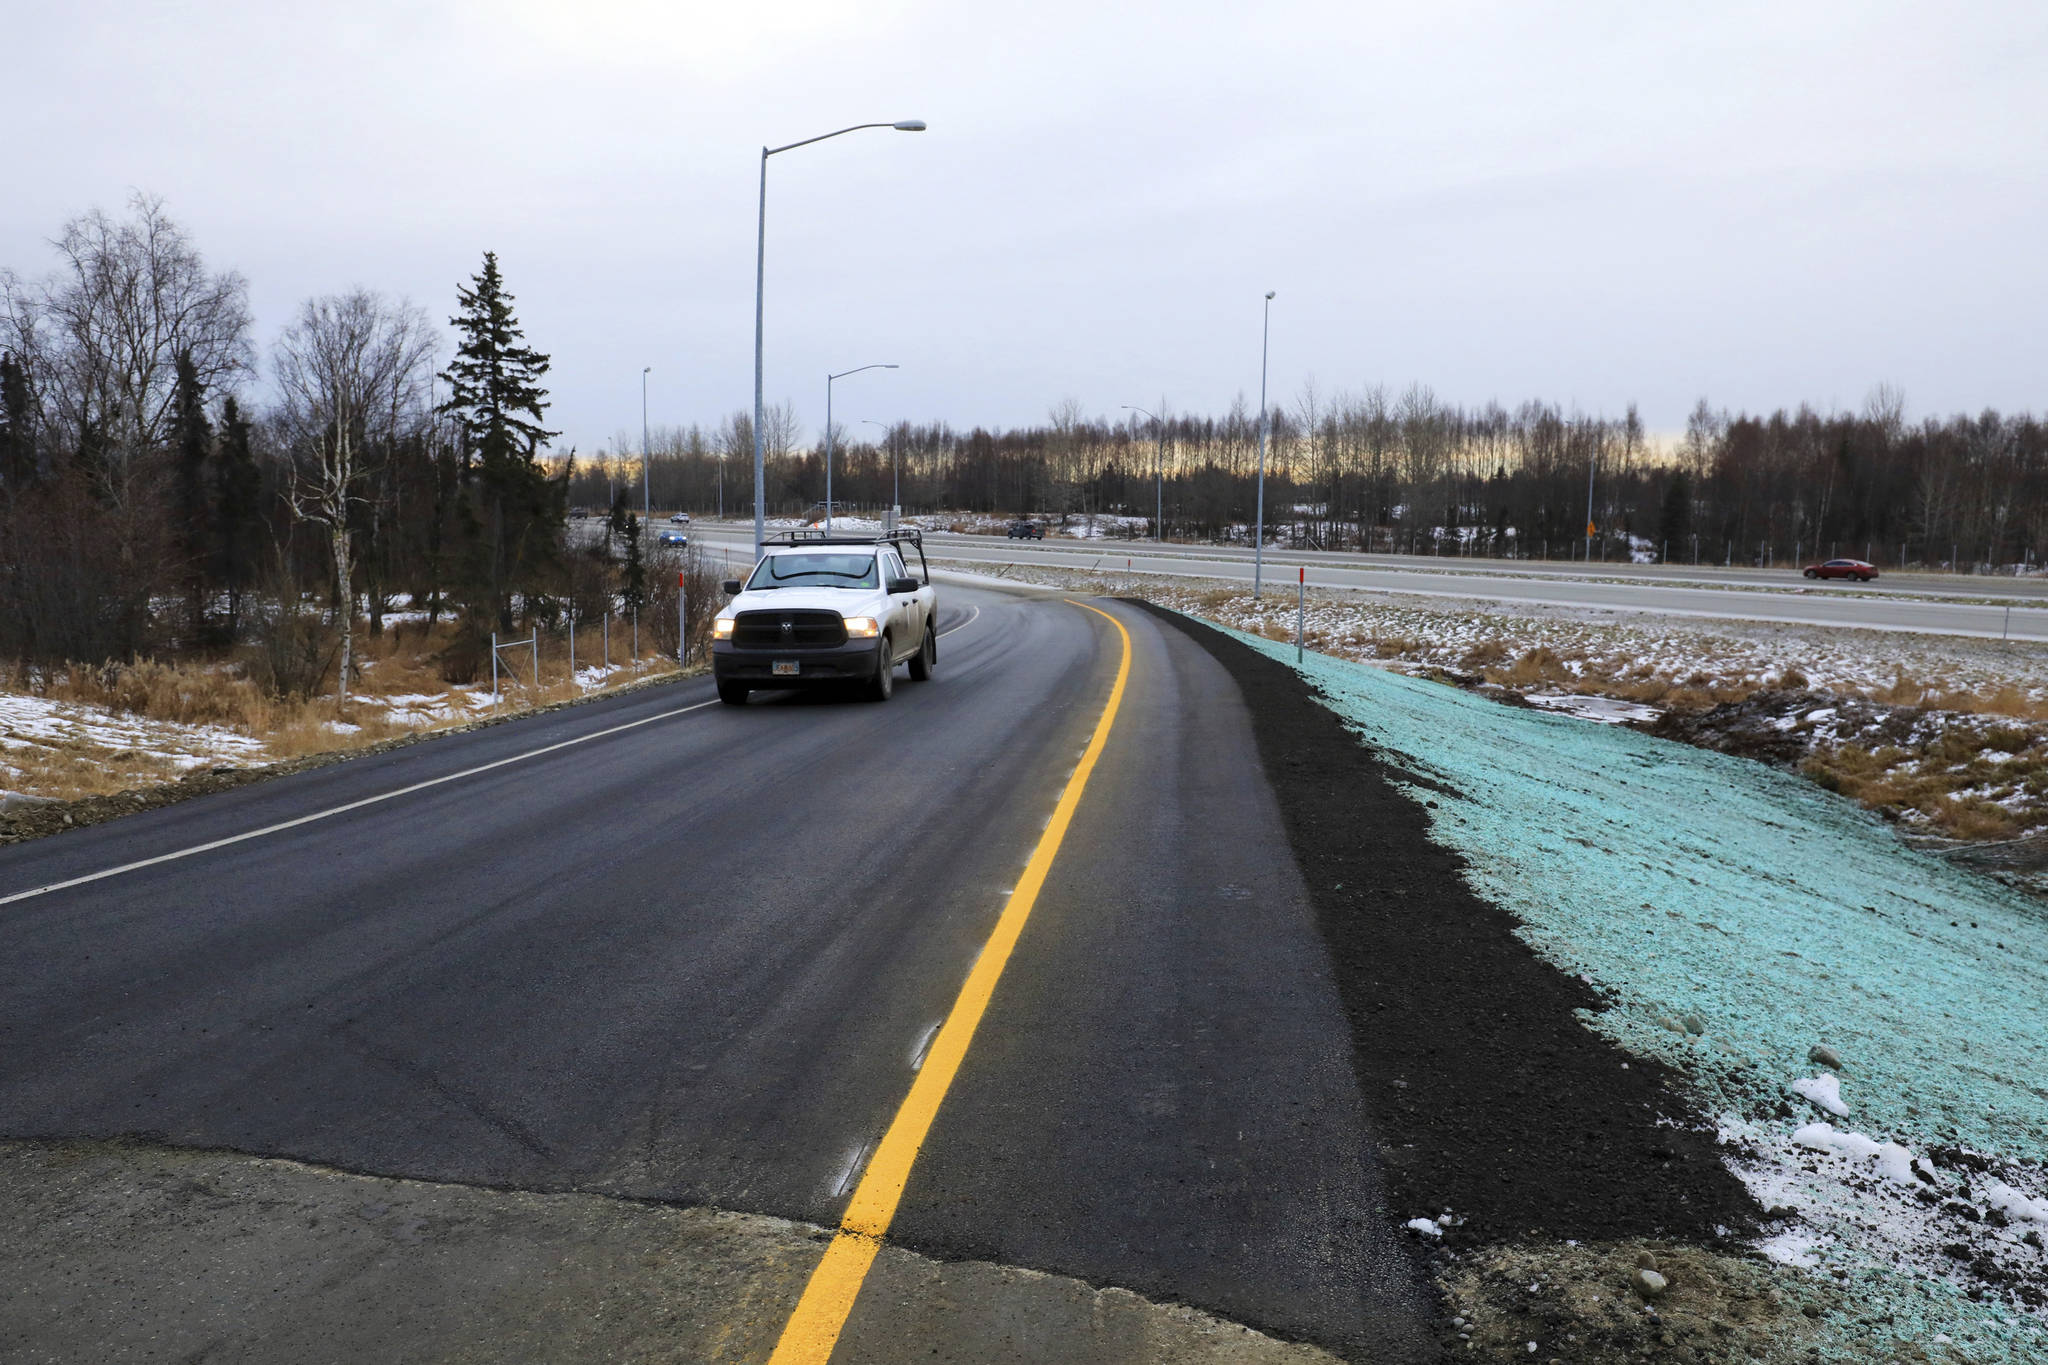 A pickup truck drives up a newly repaired off-ramp of Minnesota Drive on Wednesday, Dec. 5, 2018, in Anchorage, Alaska. A massive 7.0 earthquake and its aftershocks rocked buildings and buckled roads Nov. 30, including the ramp that’s a route to Ted Stevens Anchorage International Airport. Alaska transportation officials made rebuilding the ramp a priority. It reopened Tuesday, Dec. 4, and a crew completed shoulder work Wednesday. (AP Photo/Dan Joling)